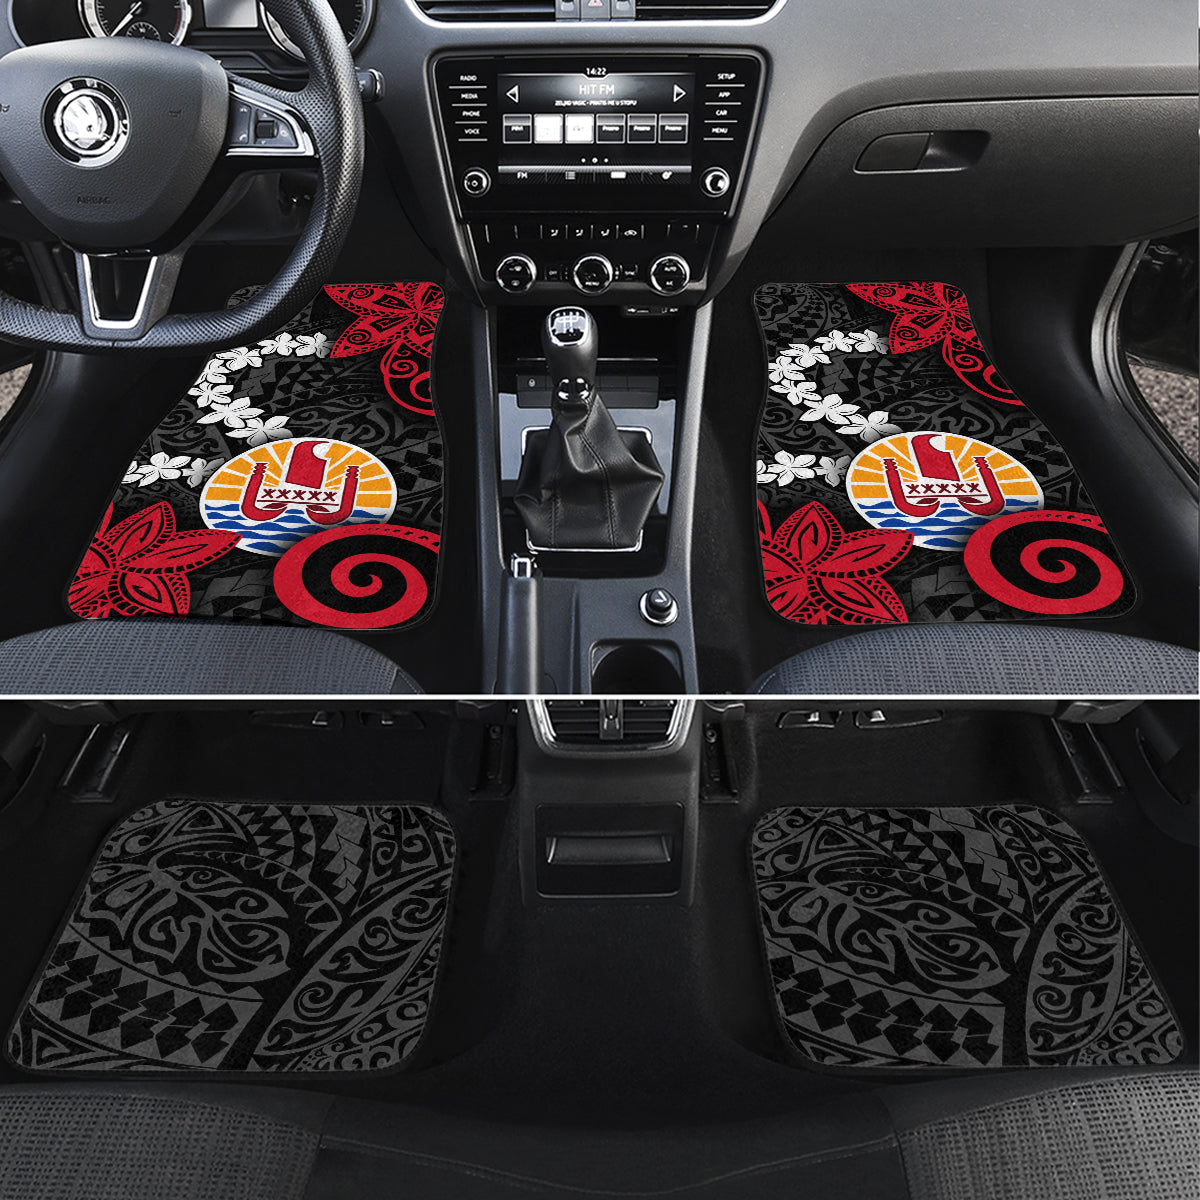 Tahiti Heiva Festival Car Mats Floral Pattern With Coat Of Arms